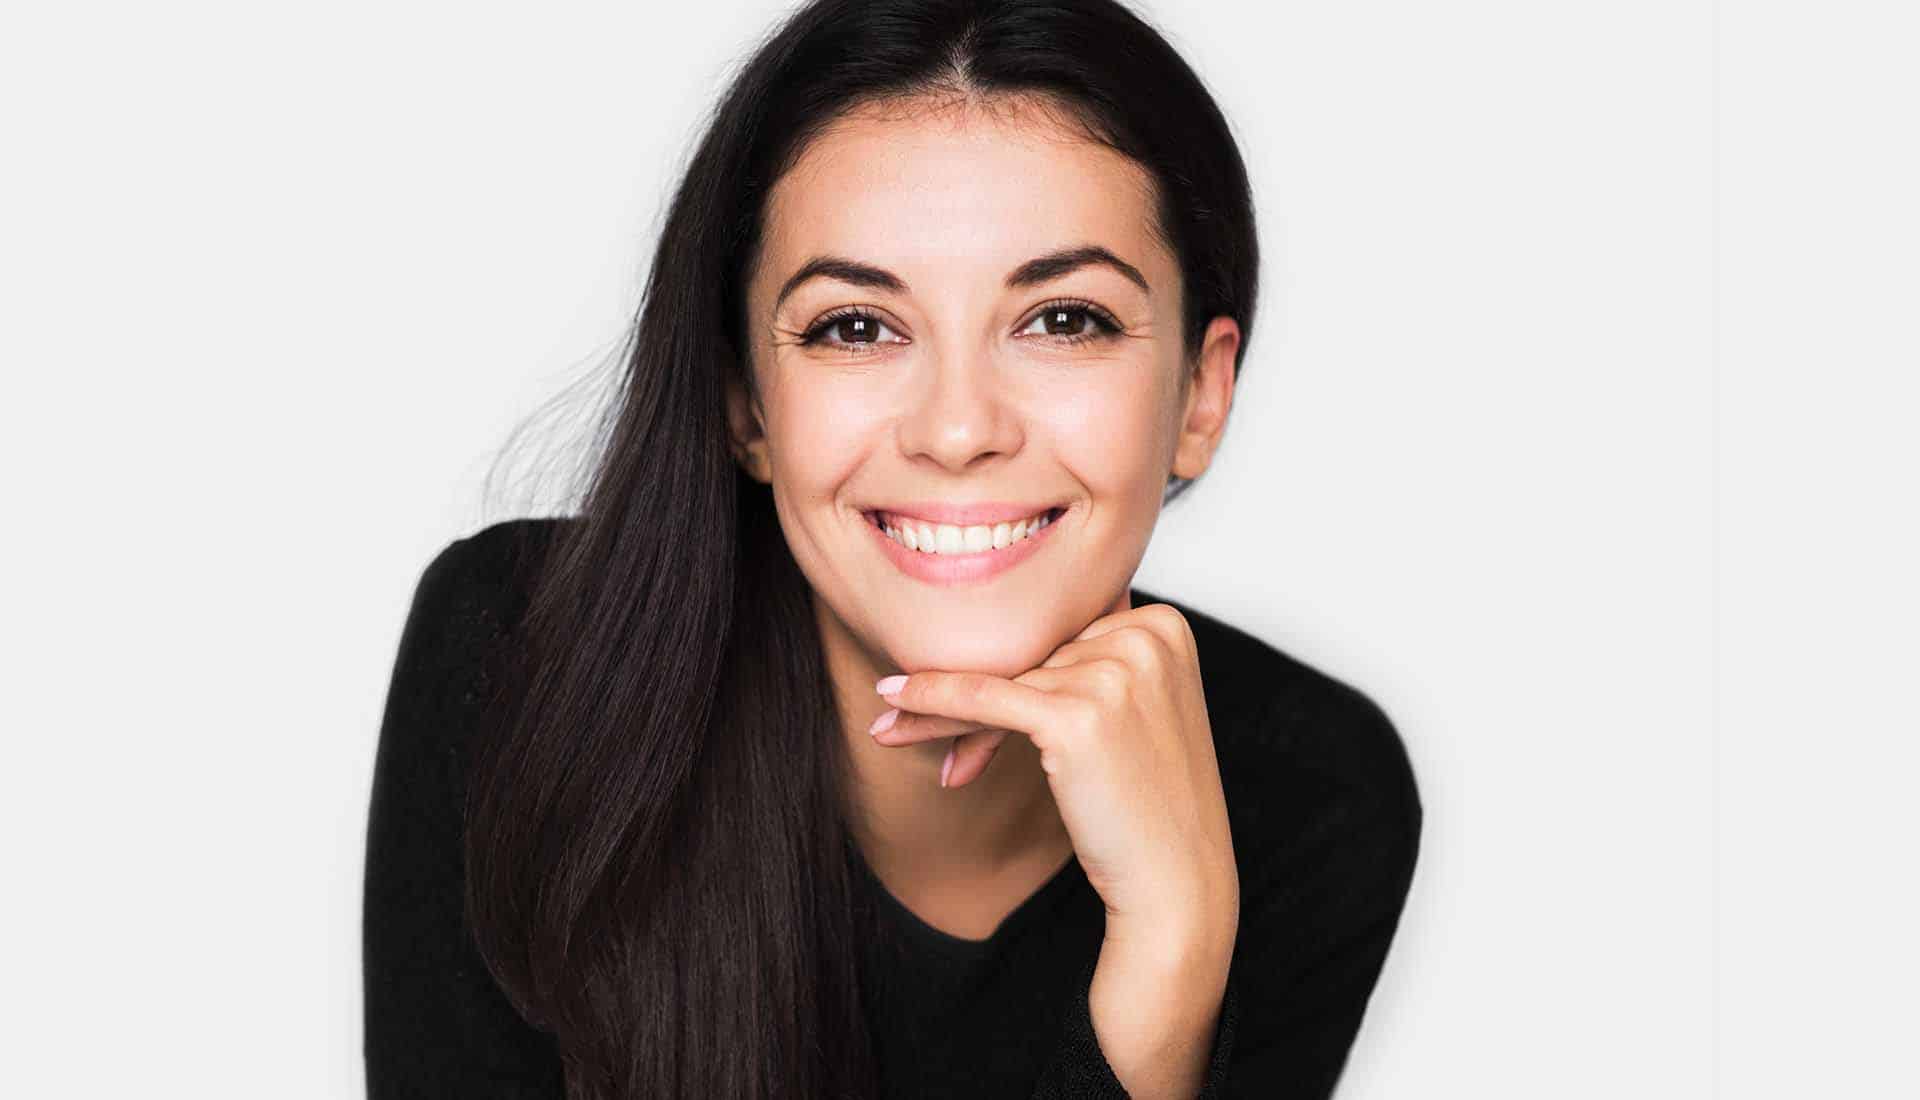 Portrait of brunette cute woman with beautiful and healthy toothy smile, with hand on chin.